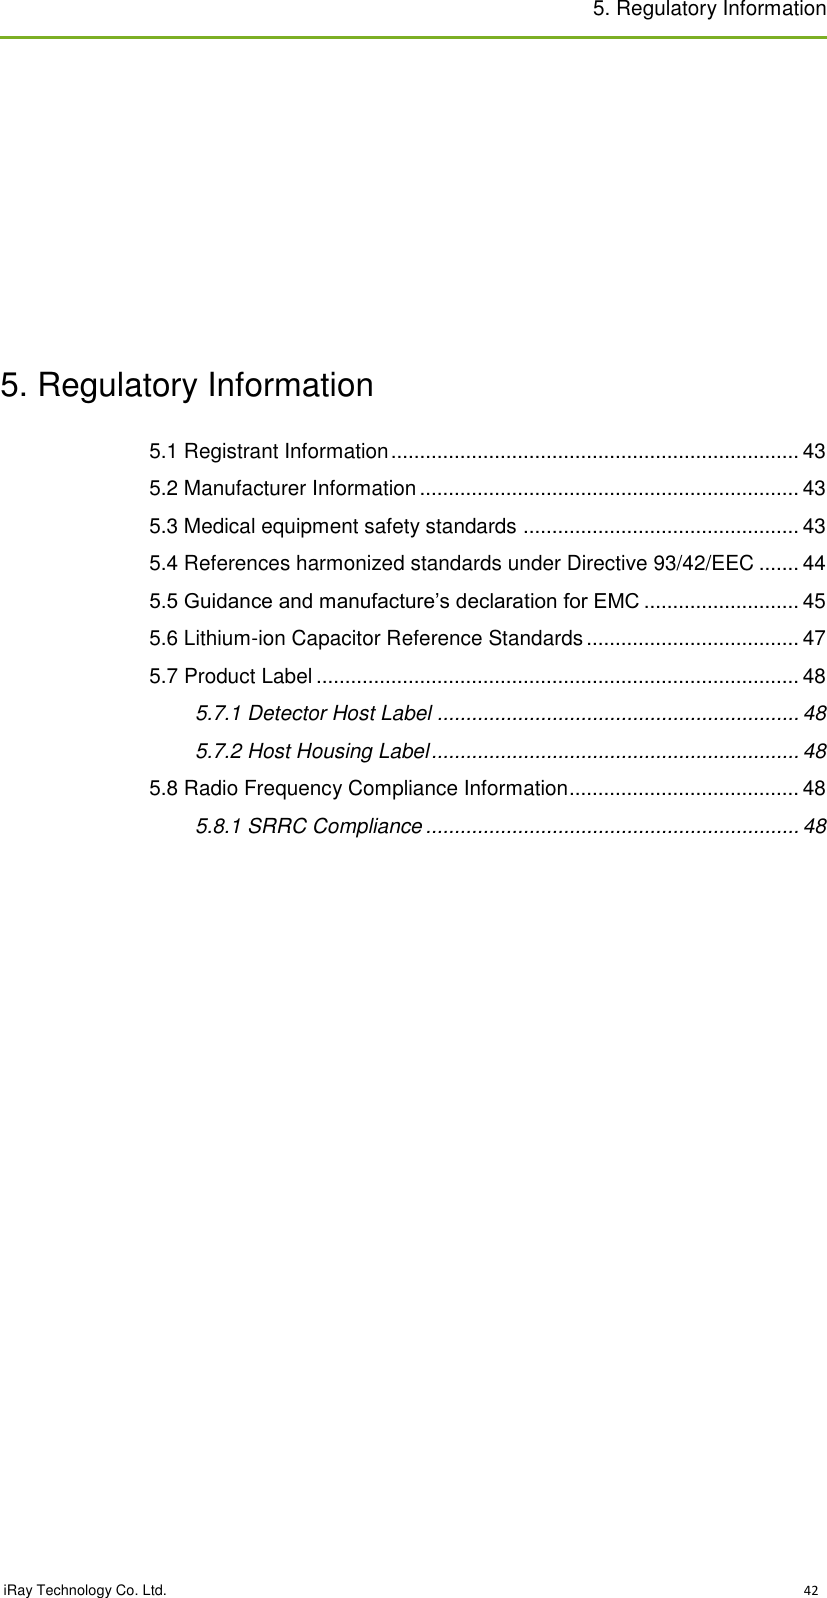 5. Regulatory Information   iRay Technology Co. Ltd.                                                                                                                                                                                                 42           5. Regulatory Information 5.1 Registrant Information ....................................................................... 43 5.2 Manufacturer Information .................................................................. 43 5.3 Medical equipment safety standards ................................................ 43 5.4 References harmonized standards under Directive 93/42/EEC ....... 44 5.5 Guidance and manufacture’s declaration for EMC ........................... 45 5.6 Lithium-ion Capacitor Reference Standards ..................................... 47 5.7 Product Label .................................................................................... 48 5.7.1 Detector Host Label ............................................................... 48 5.7.2 Host Housing Label ................................................................ 48 5.8 Radio Frequency Compliance Information ........................................ 48 5.8.1 SRRC Compliance ................................................................. 48   